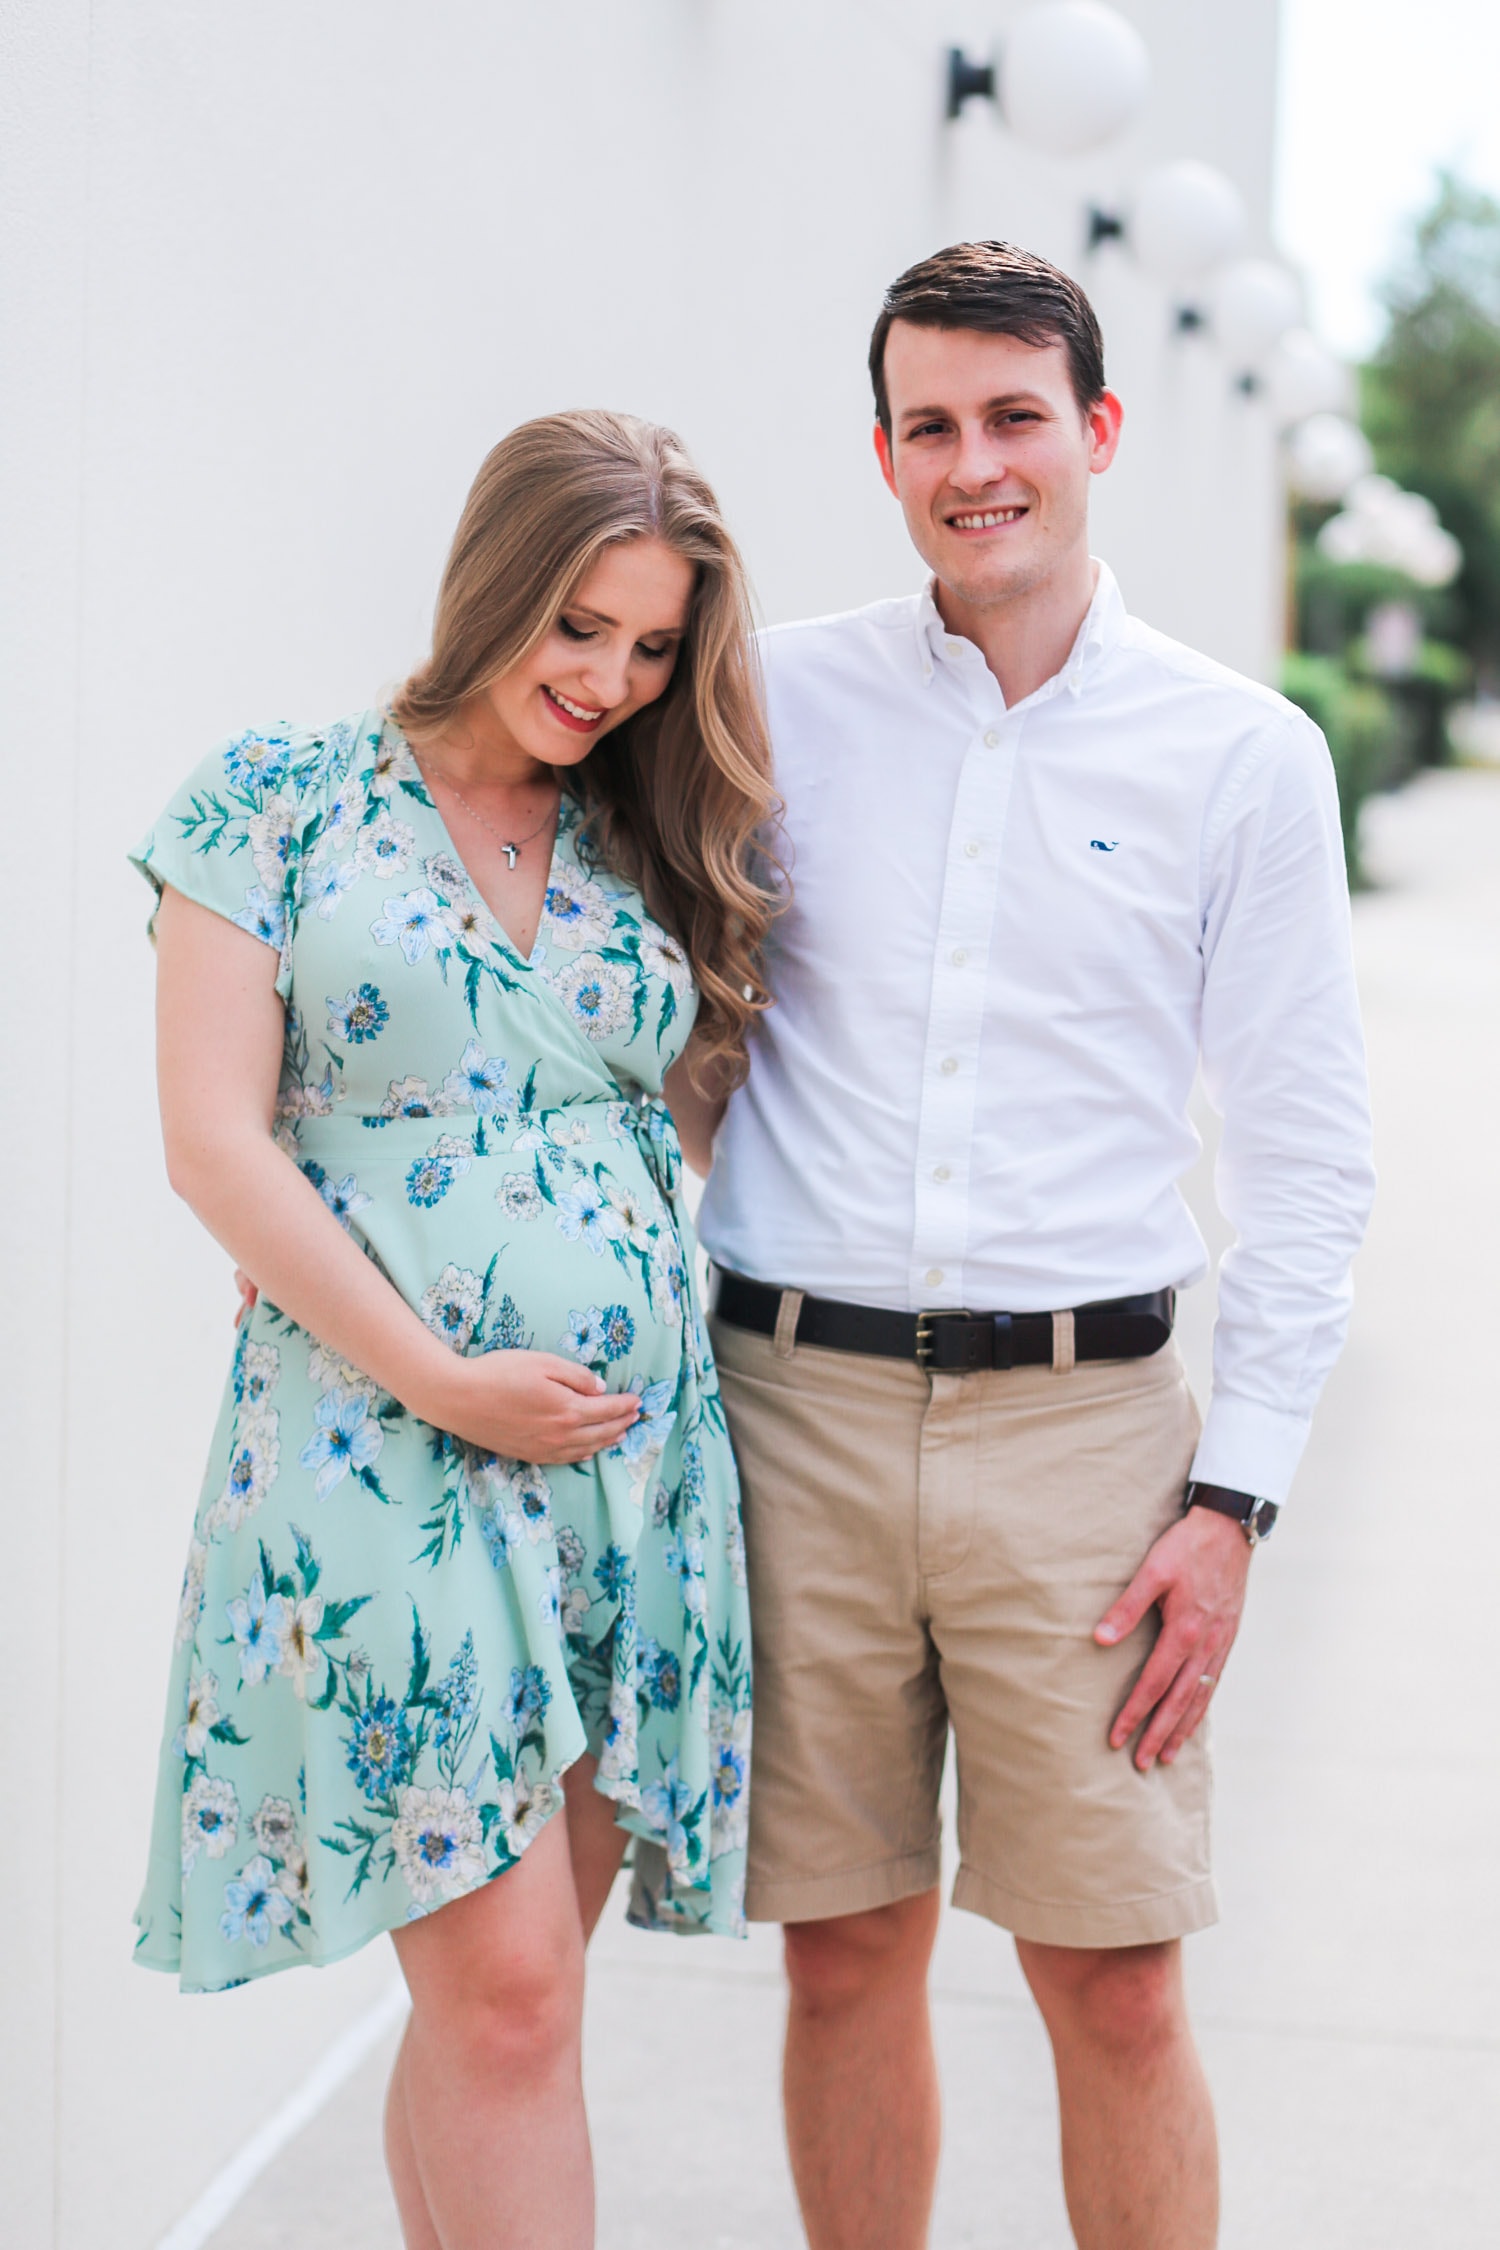 Cute pregnancy announcement photo idea | Rose gold Oh Baby balloons | ASTR pale green floral wrap dress | Flattering maternity dress | Florida beauty and fashion blogger Ashley Brooke Nicholas